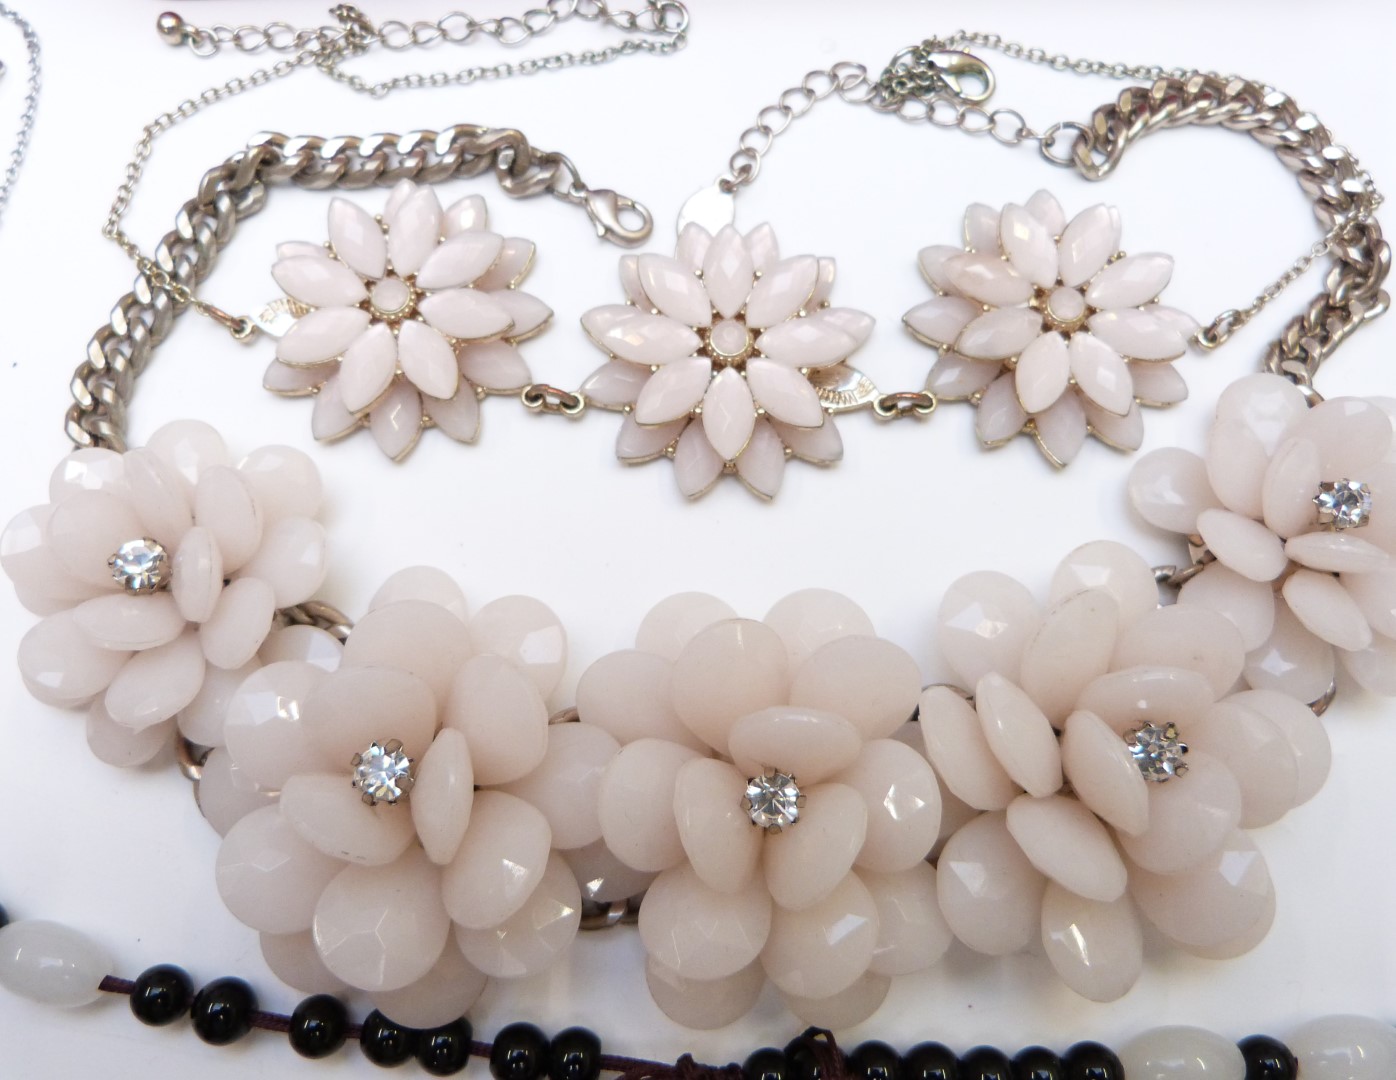 A collection of jewellery including glass beaded necklaces, sodalite necklace, faux pearls, amethyst - Image 7 of 11